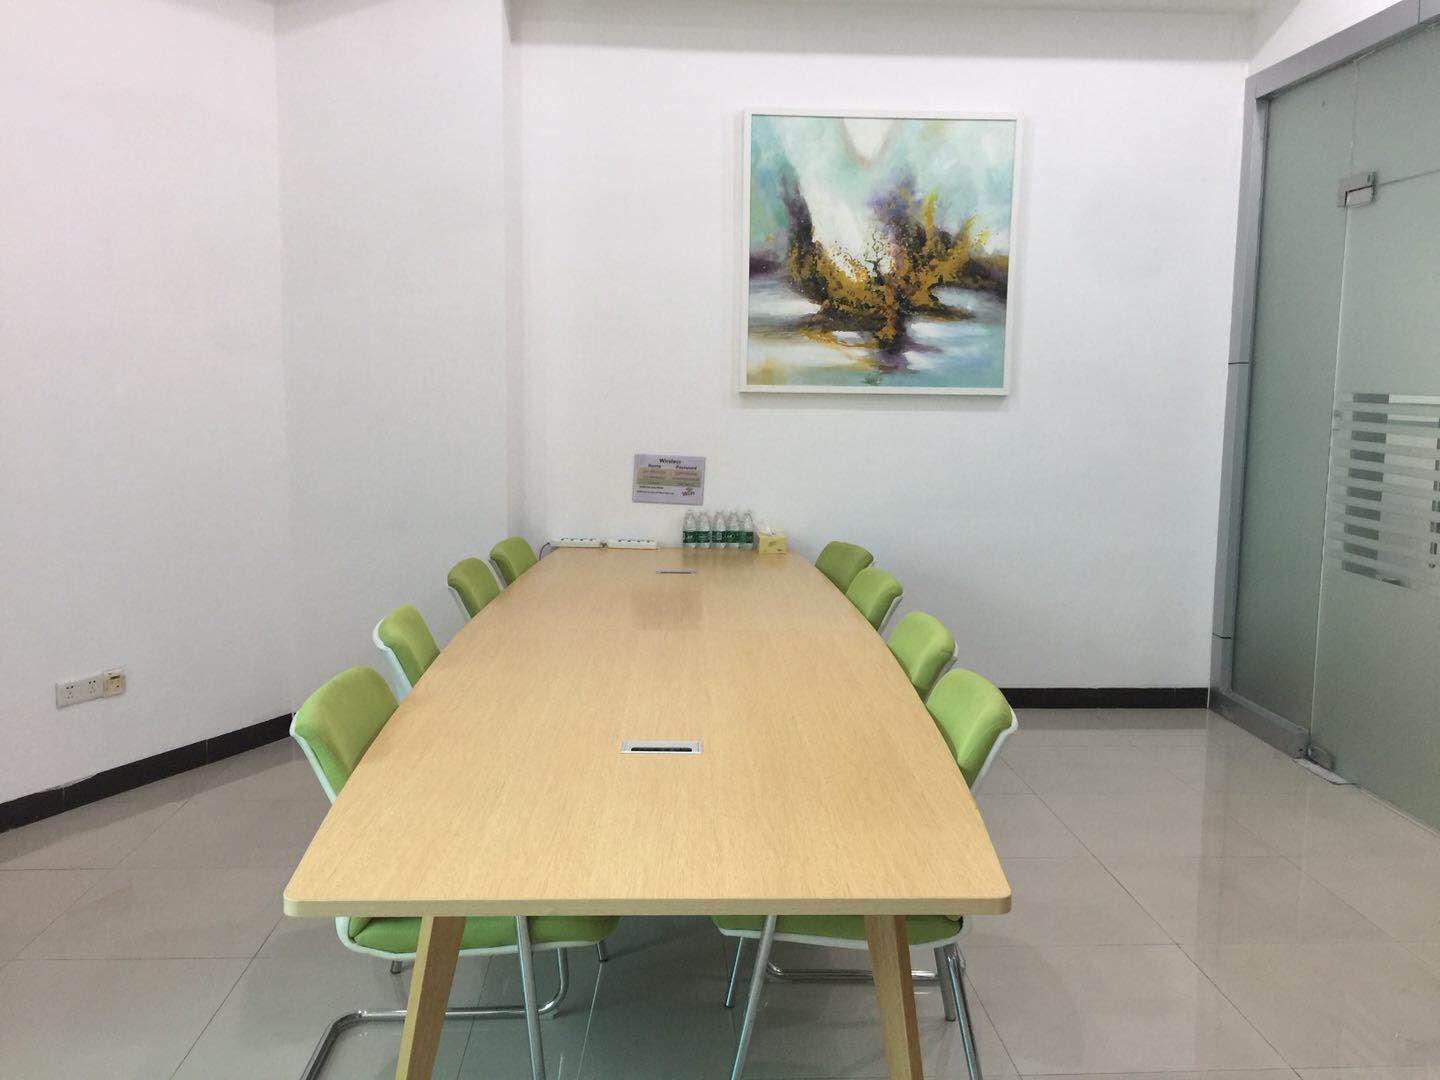 Two meeting rooms